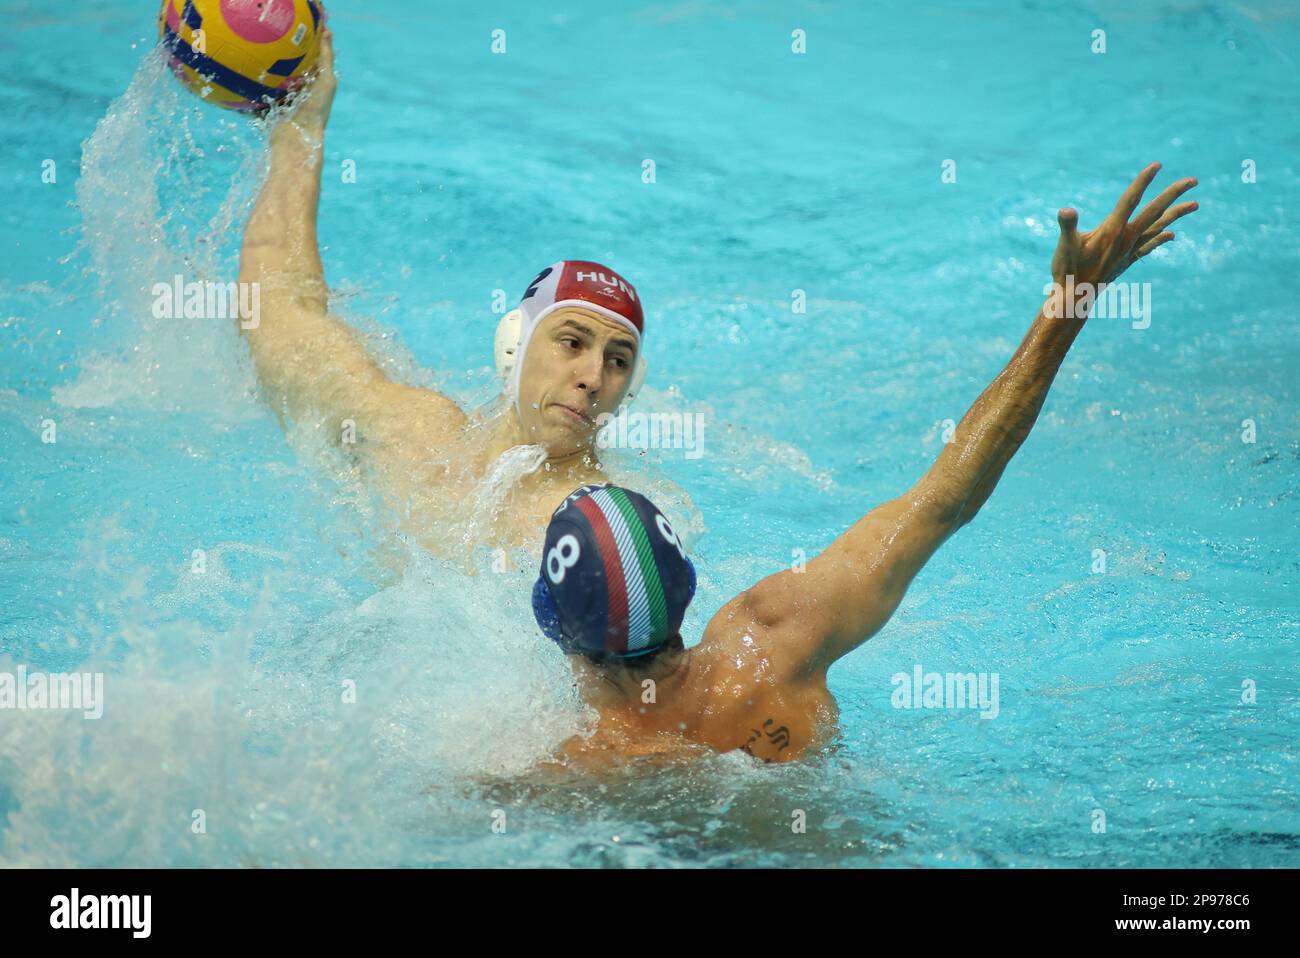 ZAGREB, CROATIA - MARCH 10: Daniel Angyal of Hungary and Gonzalo Echenique of Italy in action during Men's Water Polo World Cup match between Hungary and Italy on March 10, 2023 in Zagreb, Croatia. Photo: Marko Prpic/PIXSELL Stock Photo